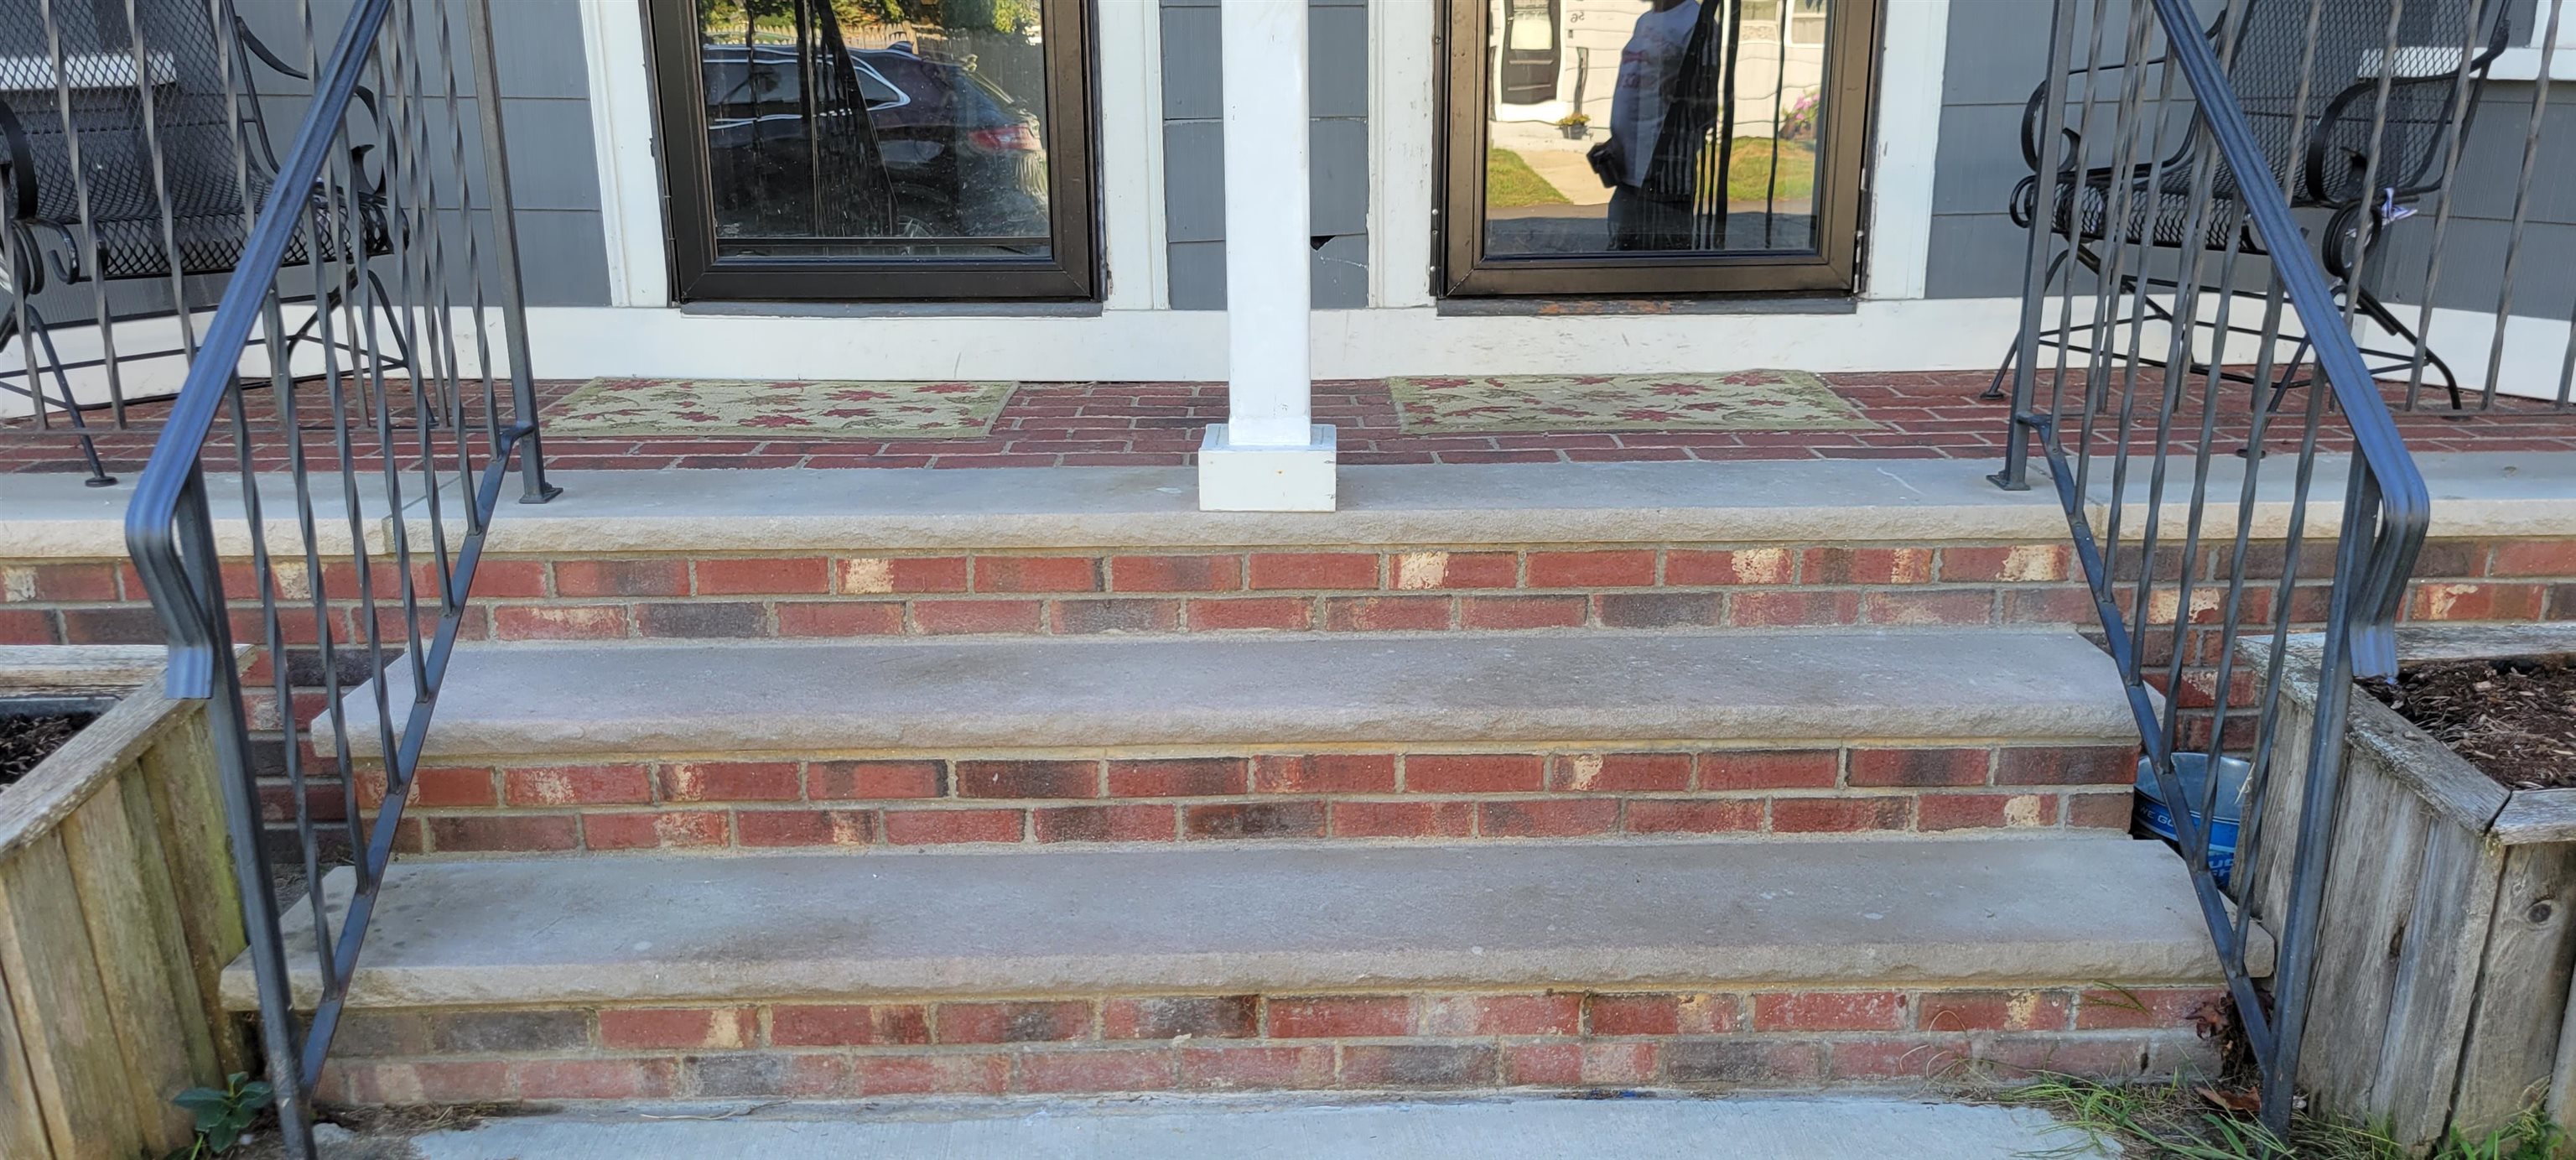 Front entry with brick work